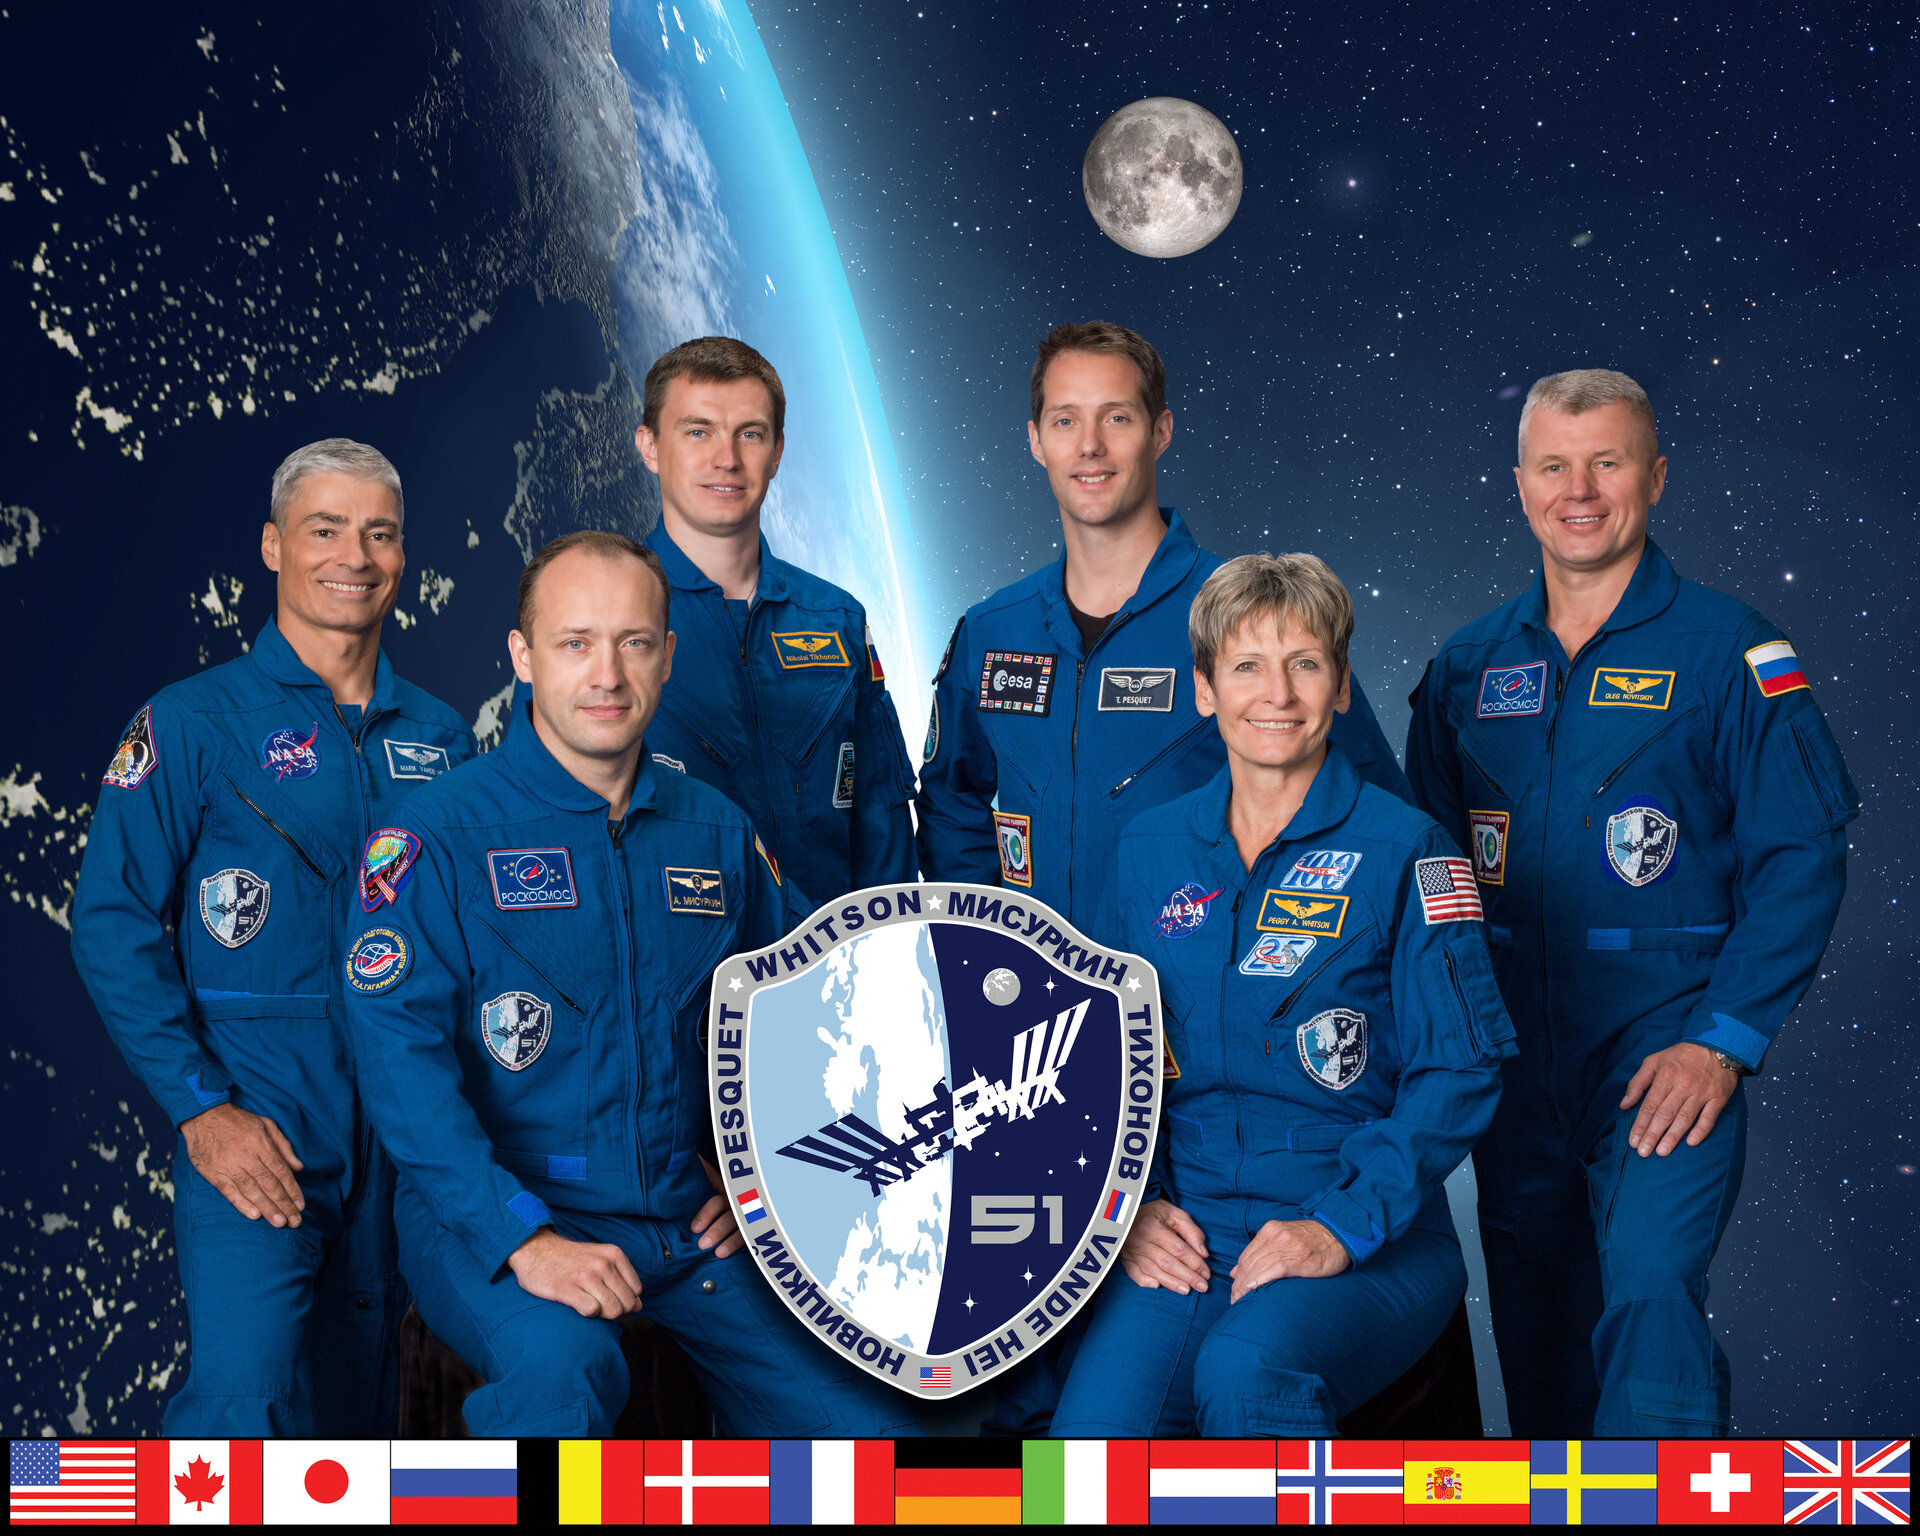 Expedition 51